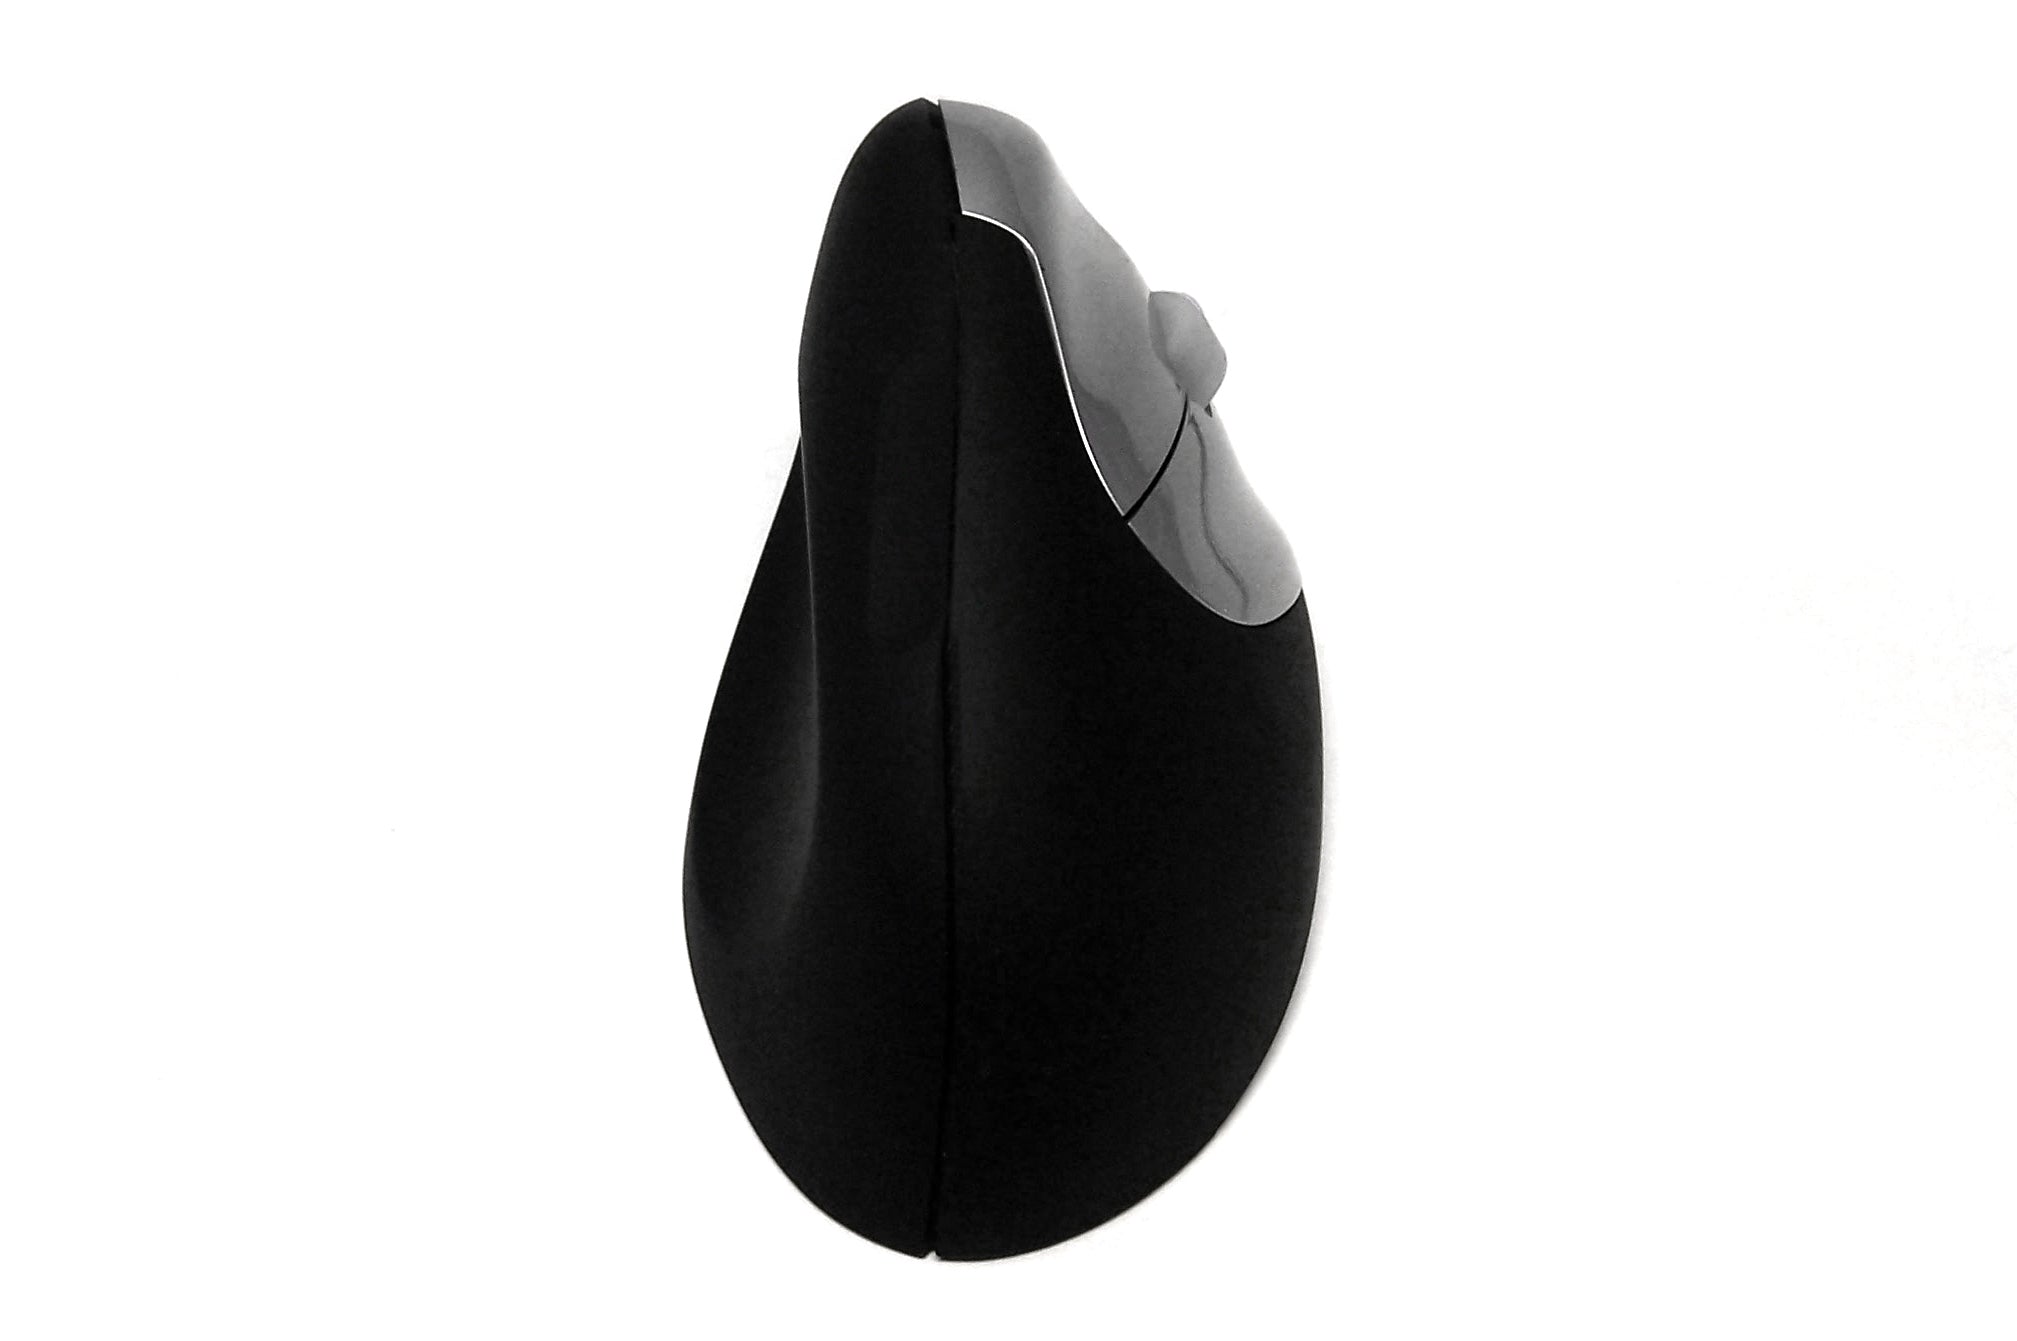 Accuratus Upright 2 RF - RF 2.4GHz Wireless Upright Vertical Mouse to Help Prevent RSI